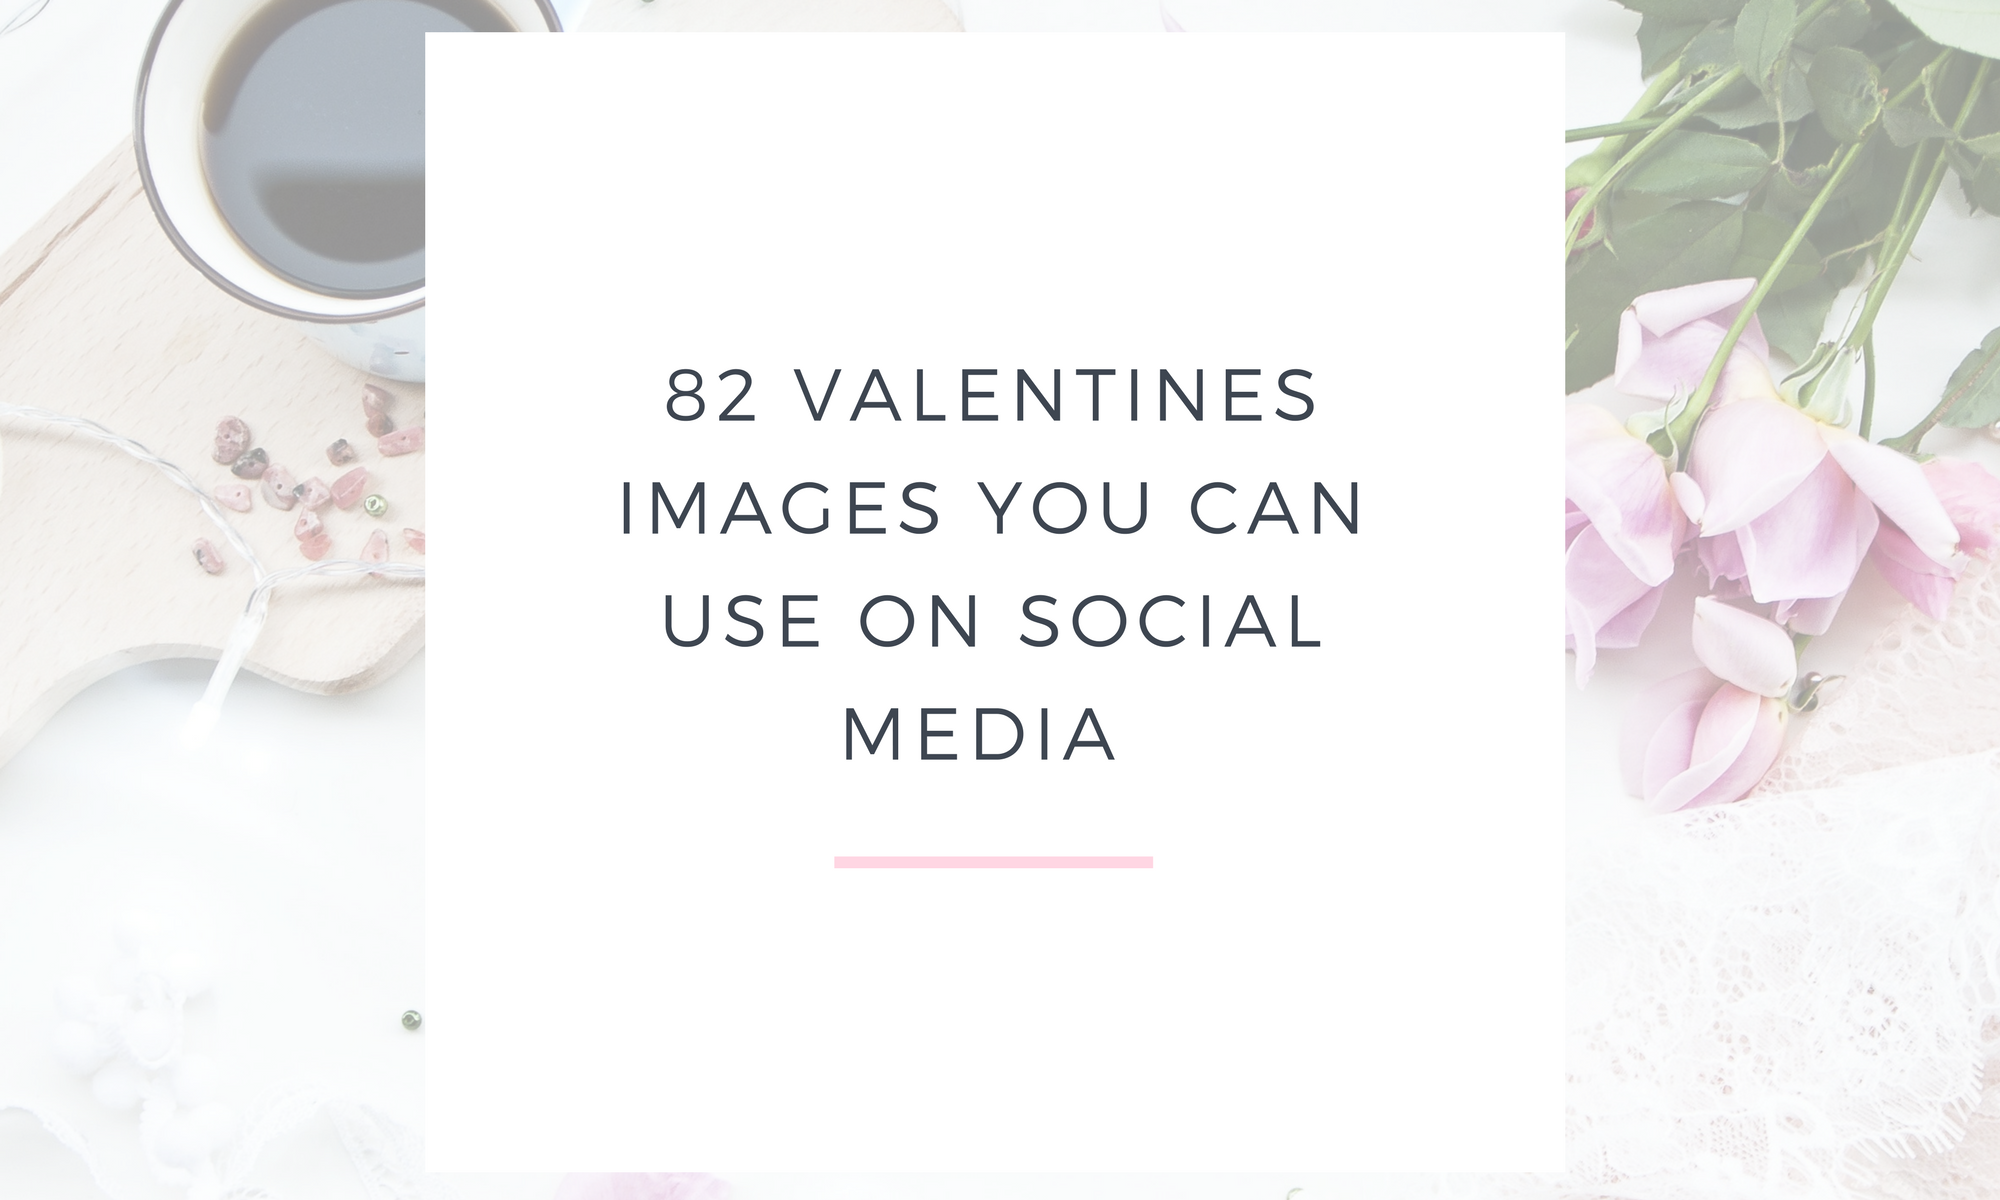 82 Valentines Images You Can Use On Social Media Header